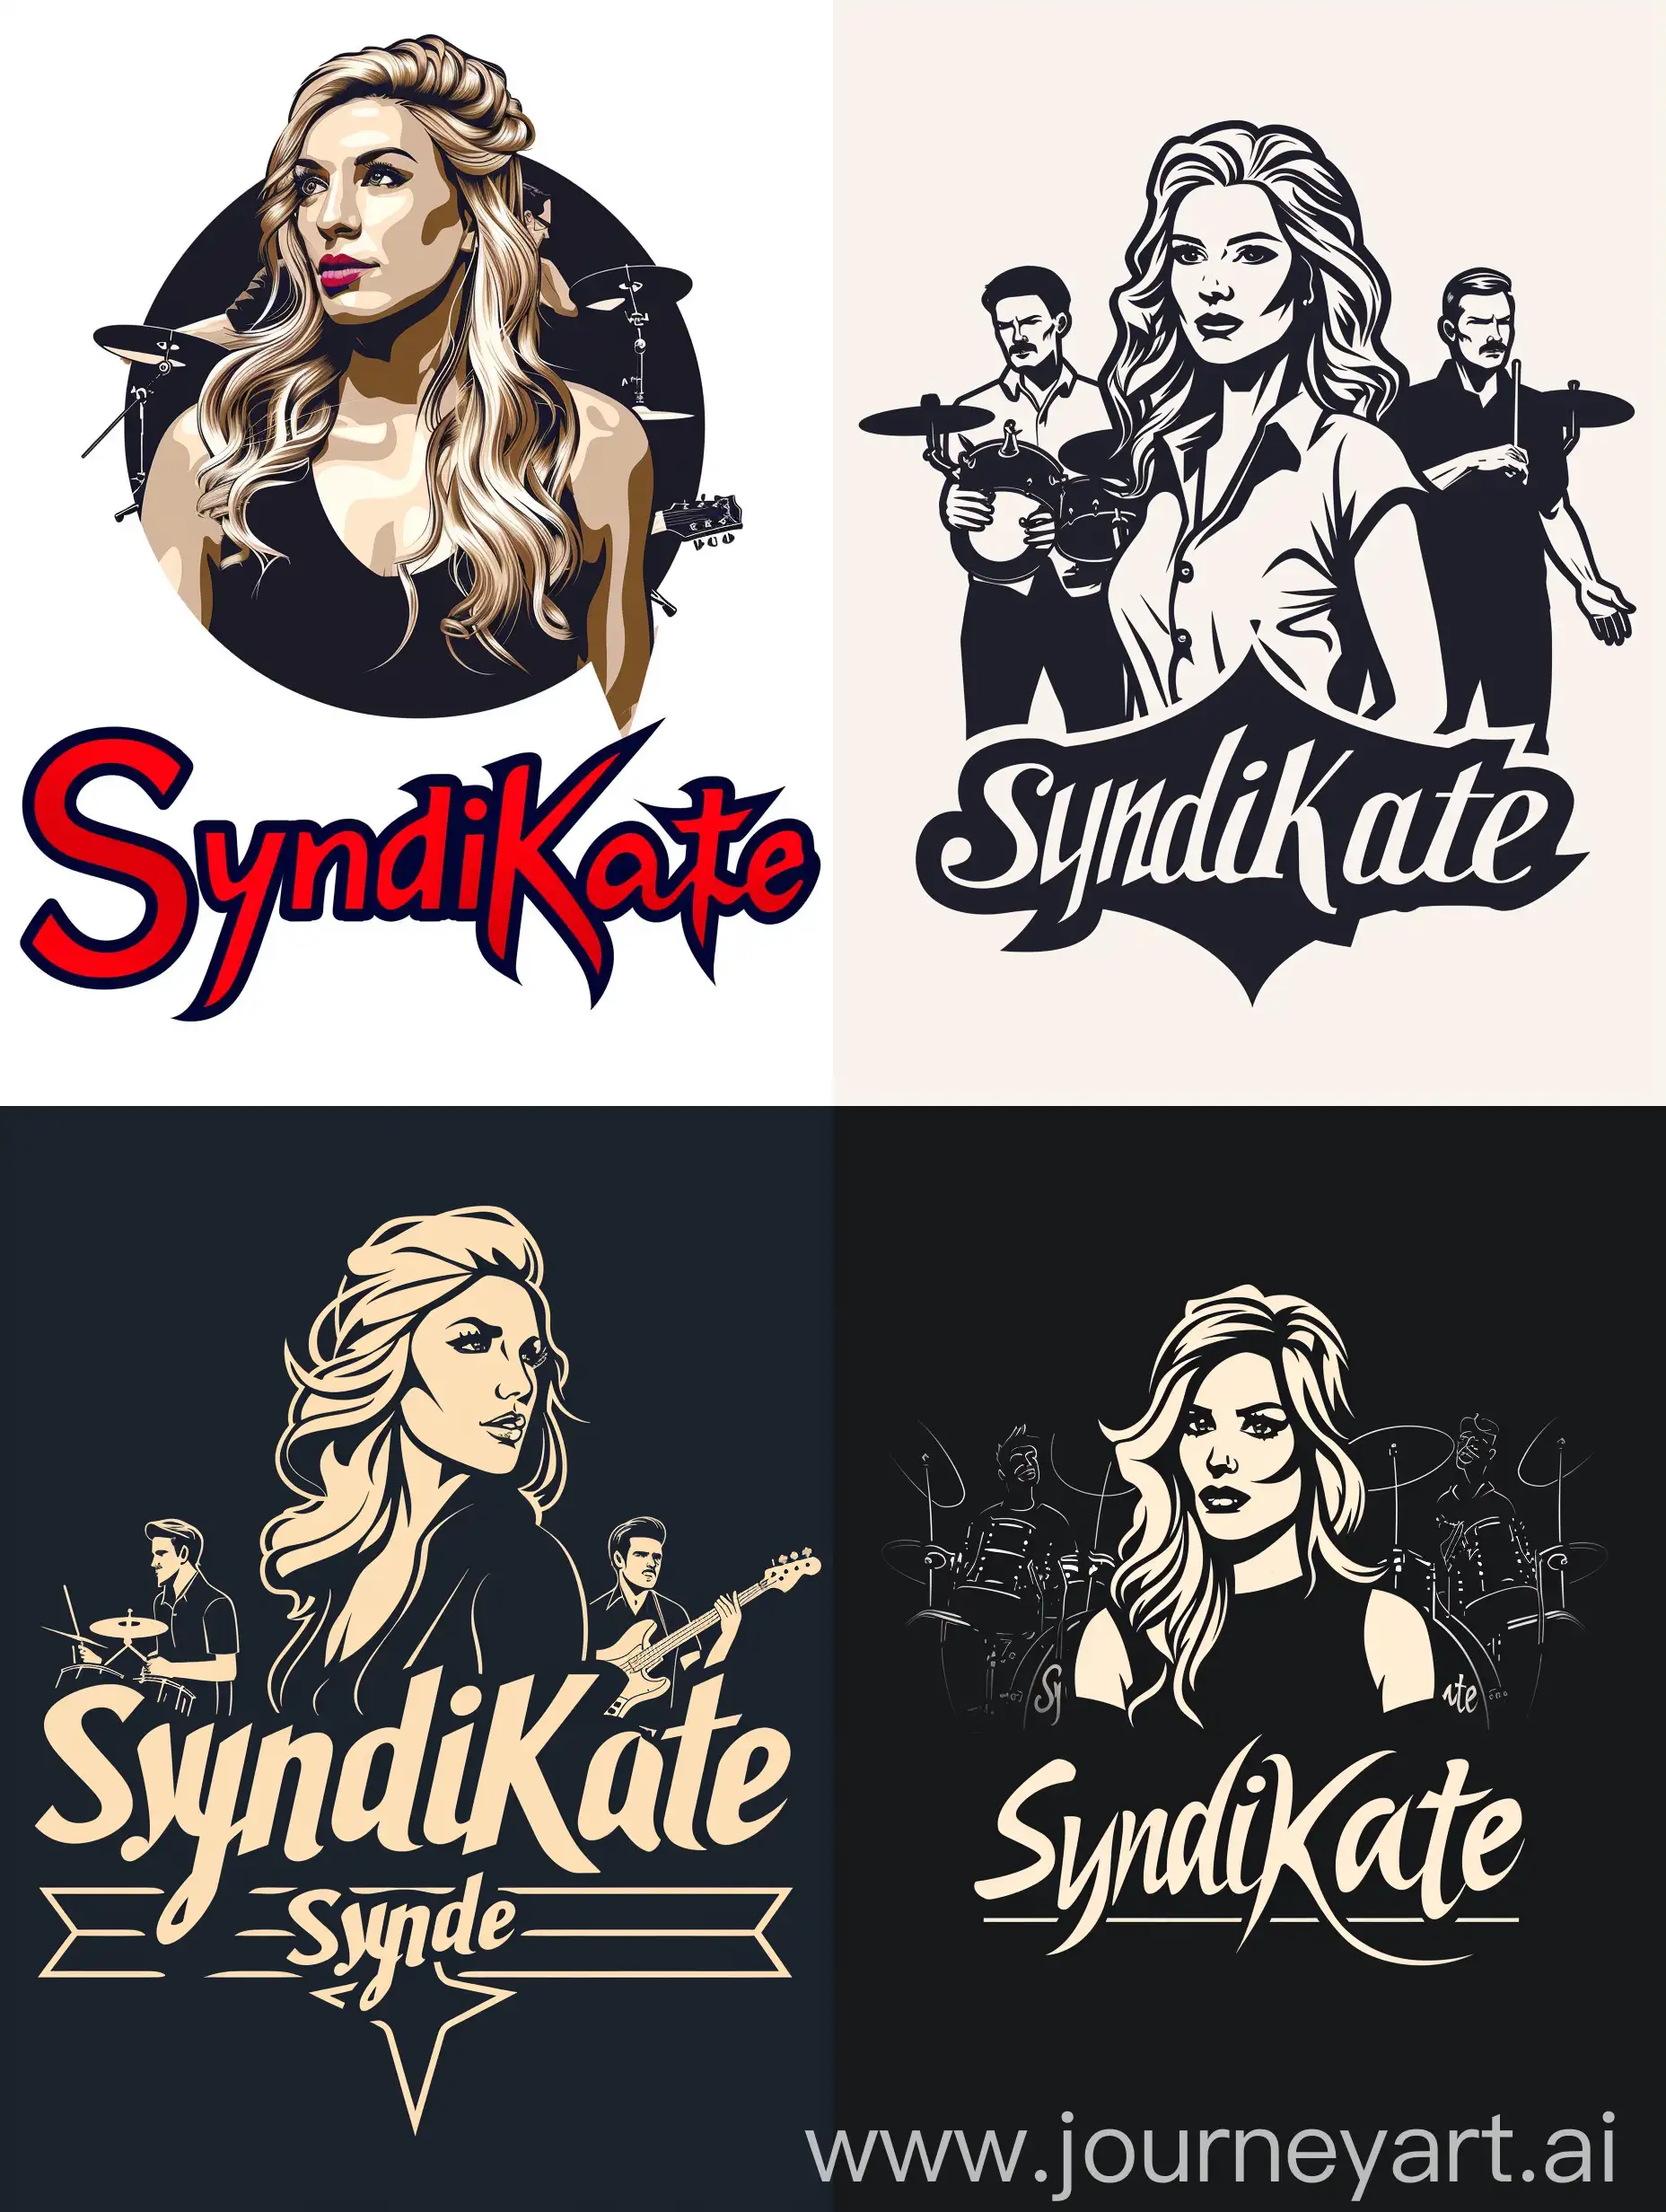 SyndiKate-Blonde-Singer-Surrounded-by-Professional-Male-Musicians